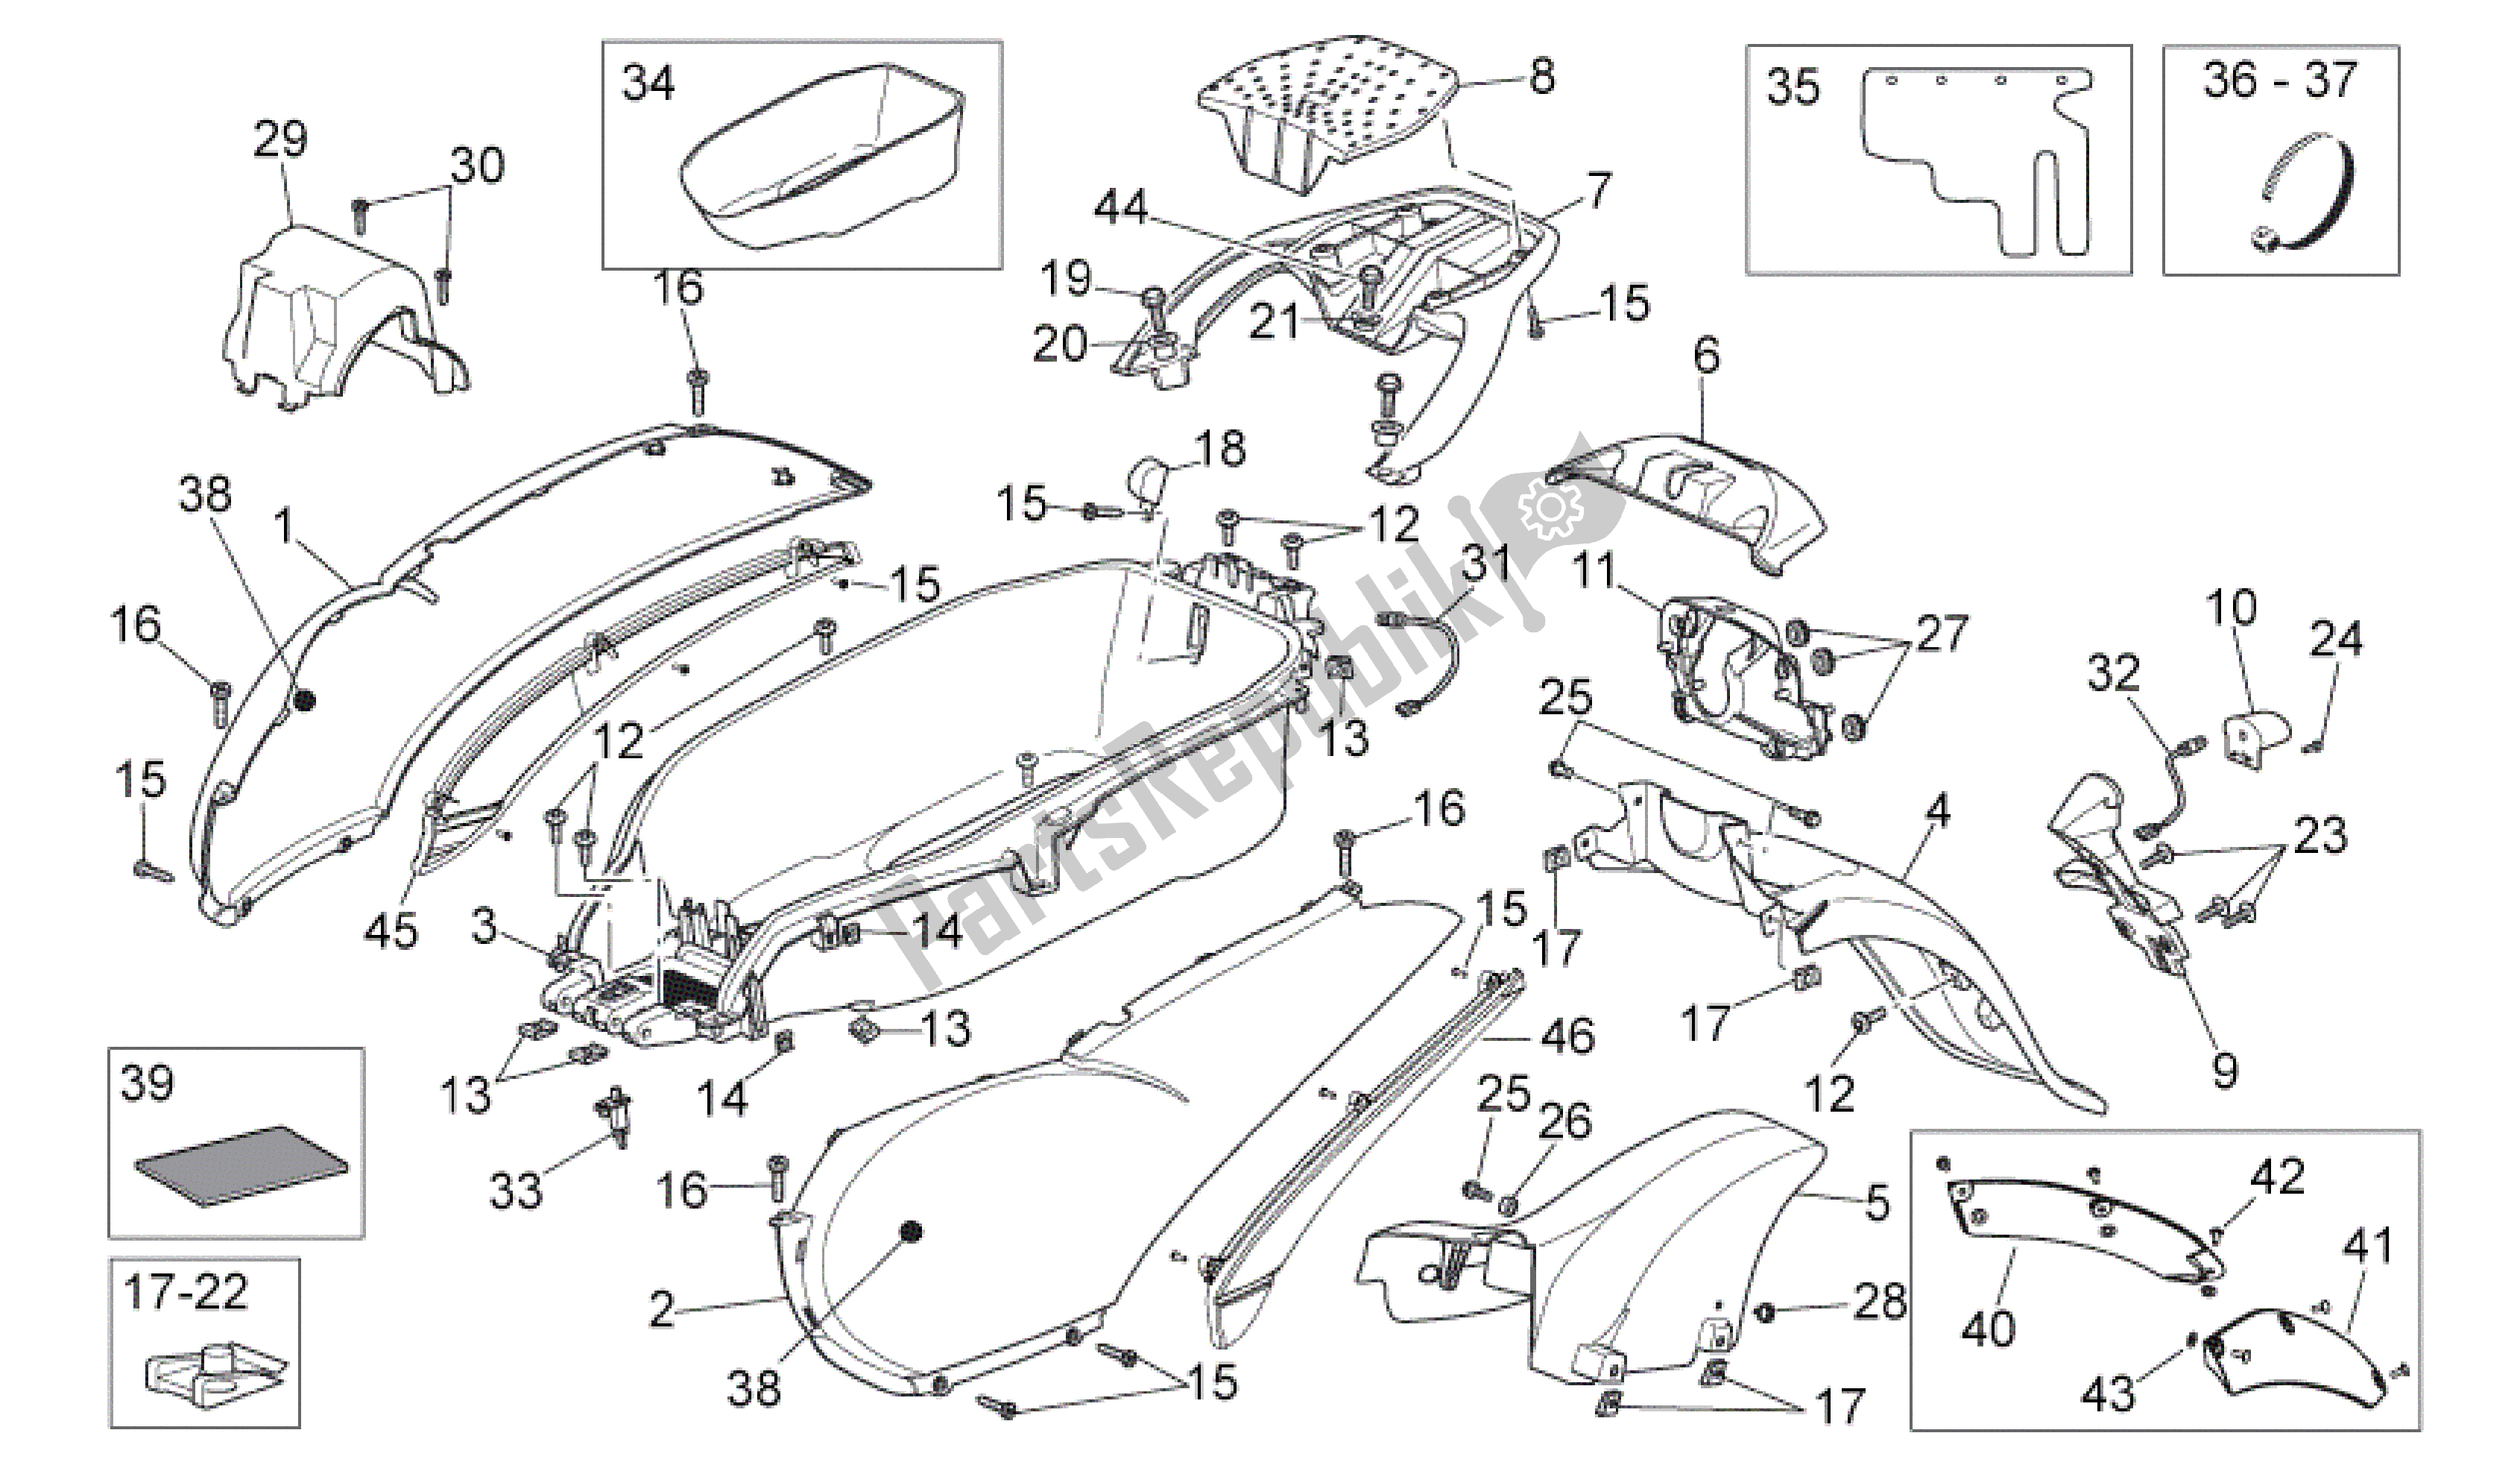 All parts for the Rear Body of the Aprilia Scarabeo 492 2006 - 2008